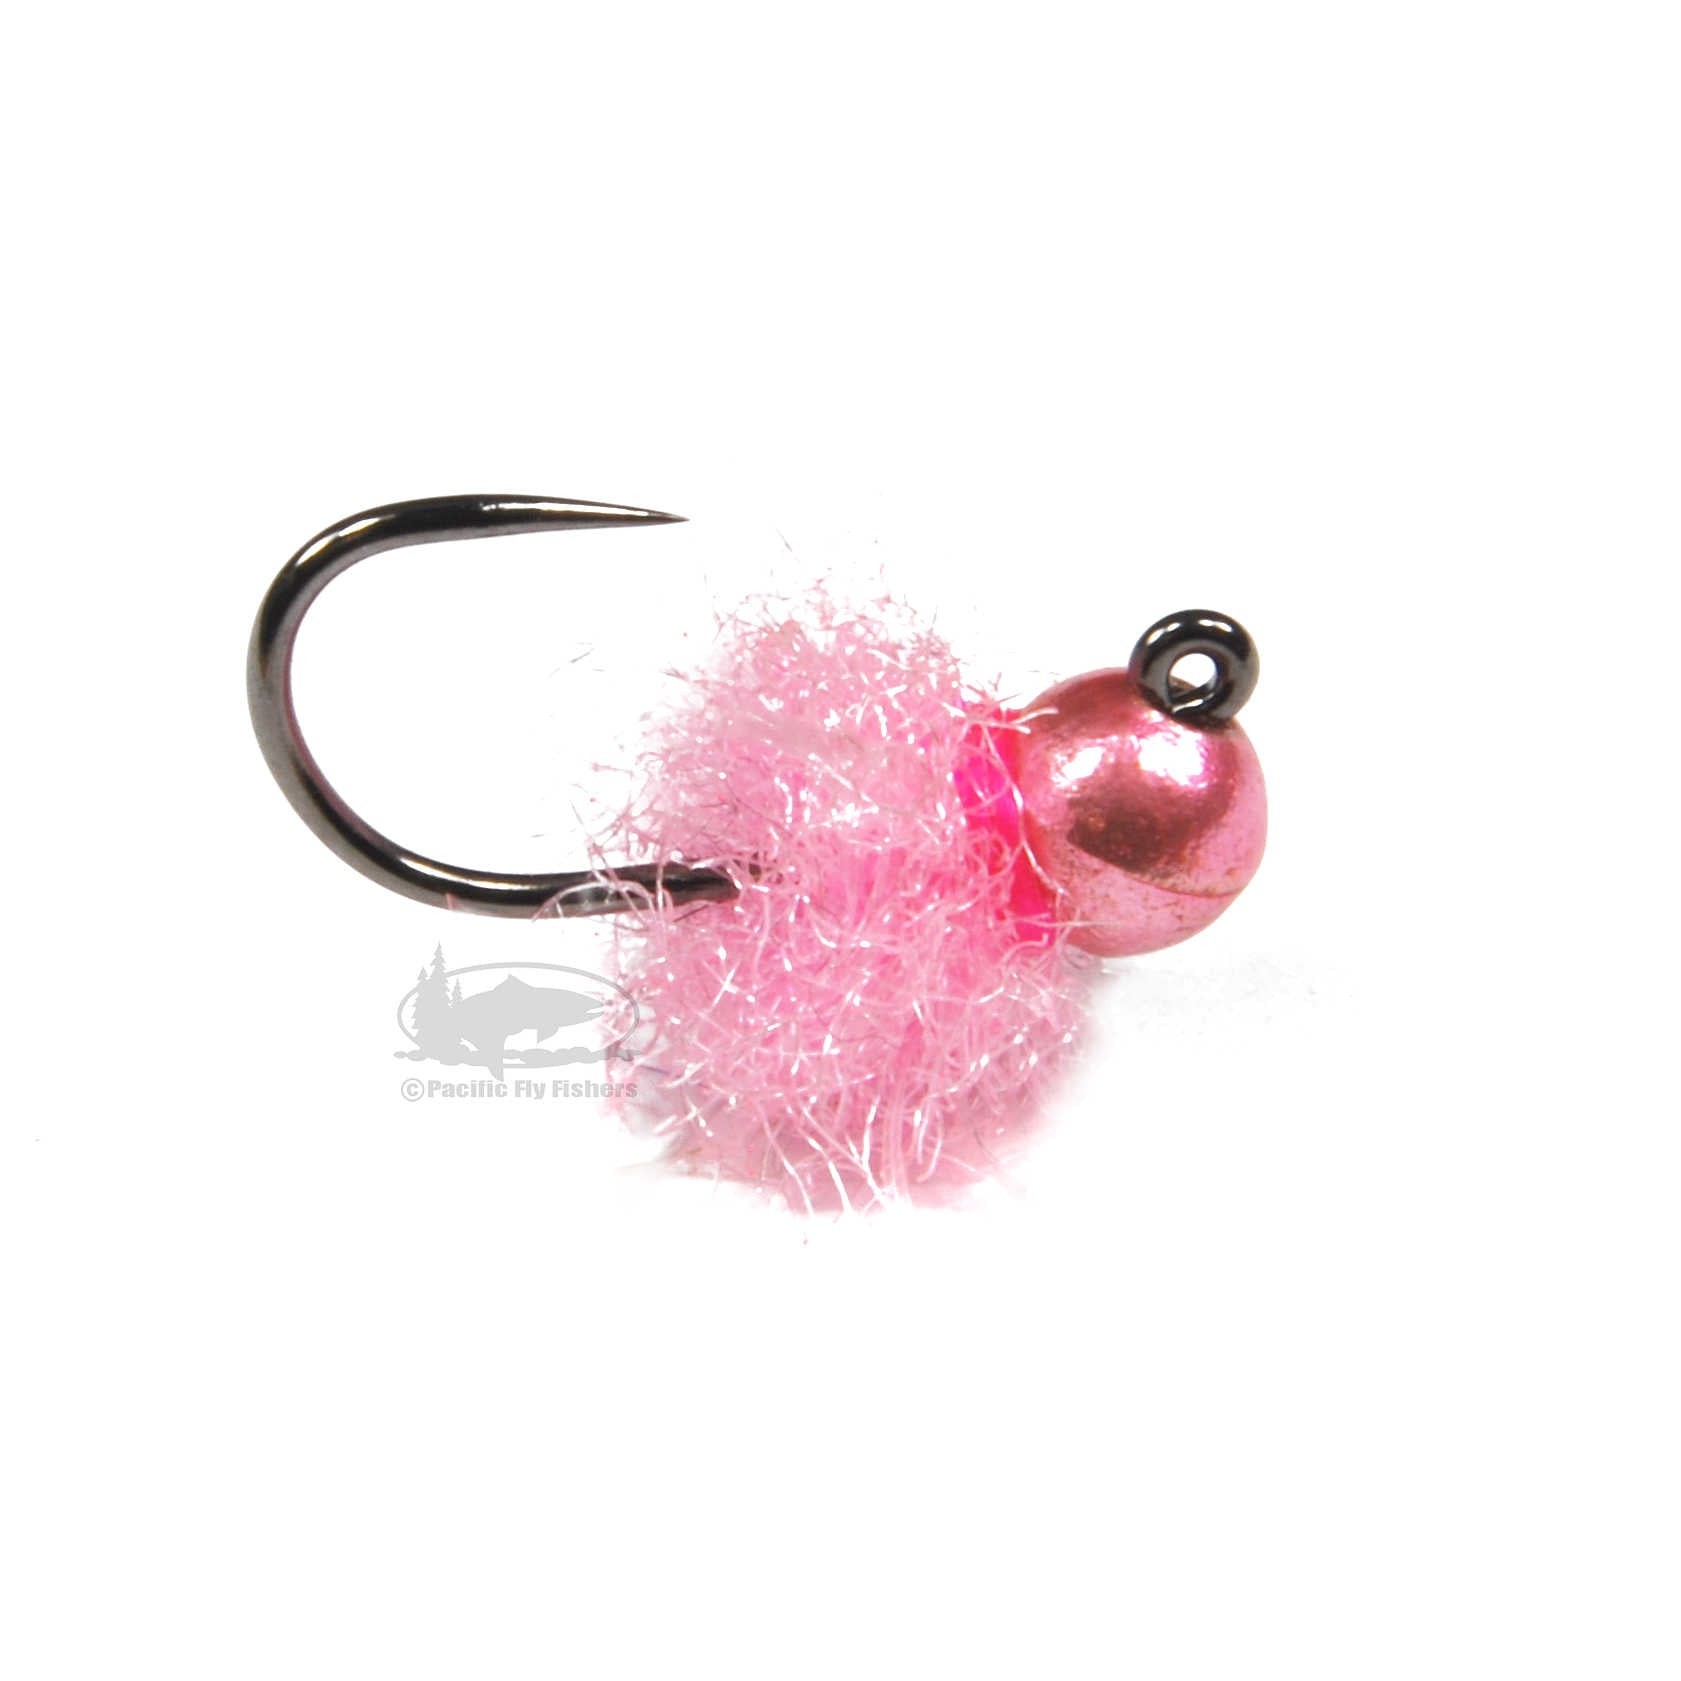 Slush Egg - Pink  Pacific Fly Fishers